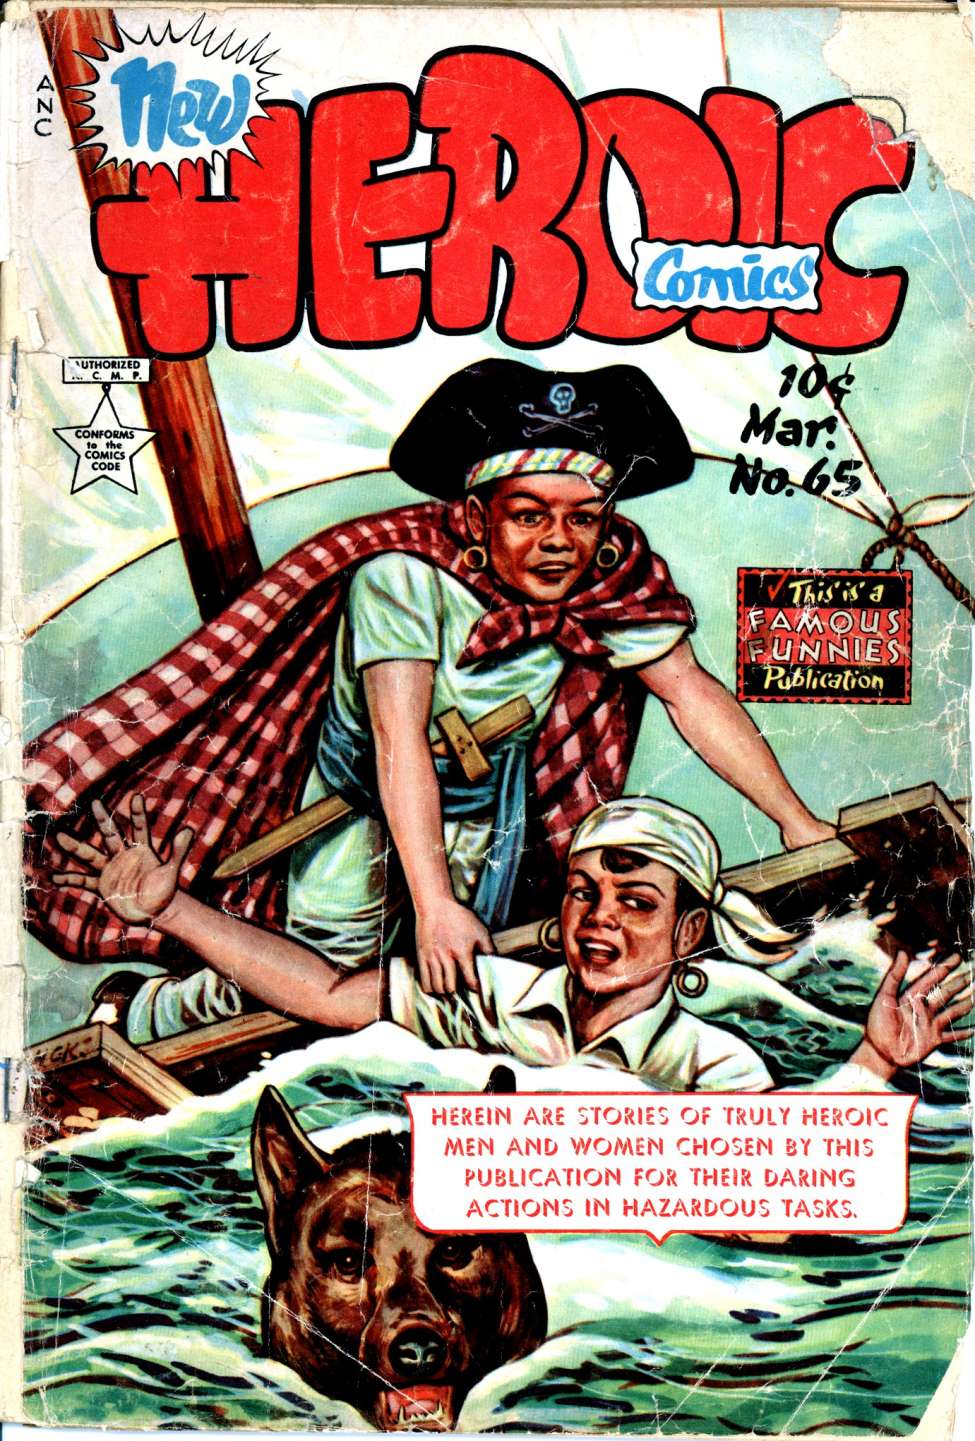 Book Cover For New Heroic Comics 65 - Version 1